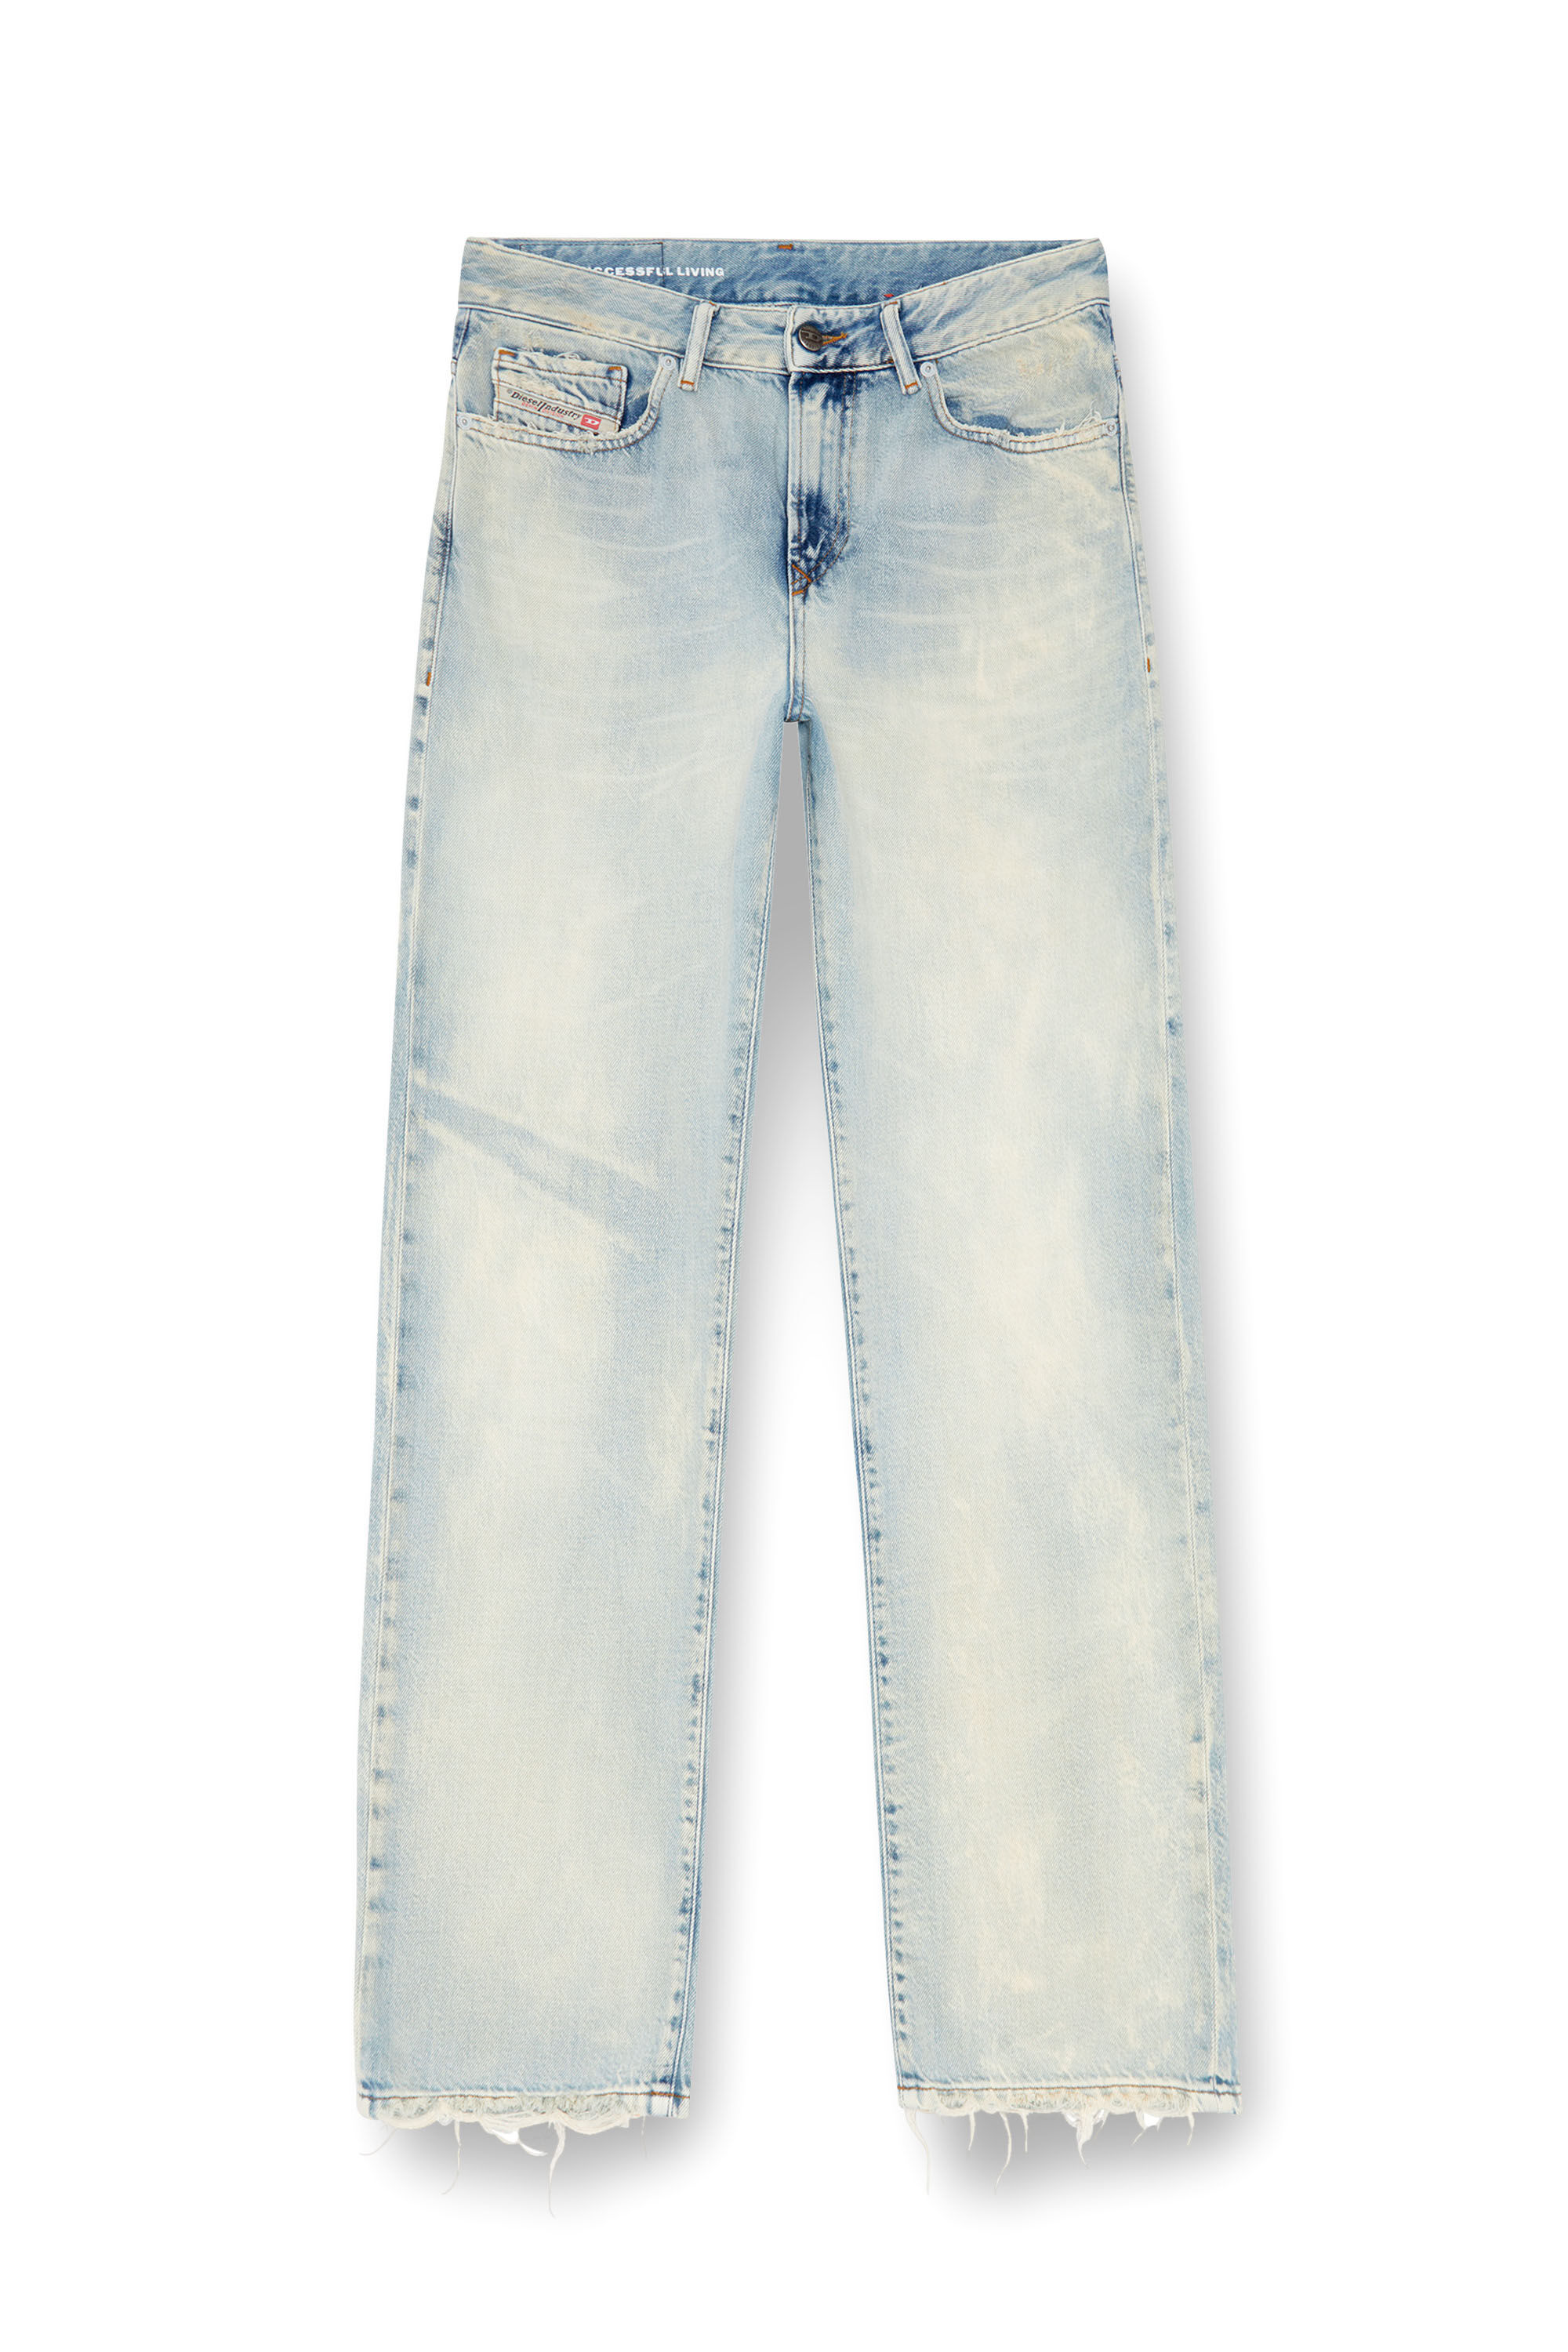 Diesel - Straight Jeans 1999 D-Reggy 09J89, Mujer Straight Jeans - 1999 D-Reggy in Azul marino - Image 2